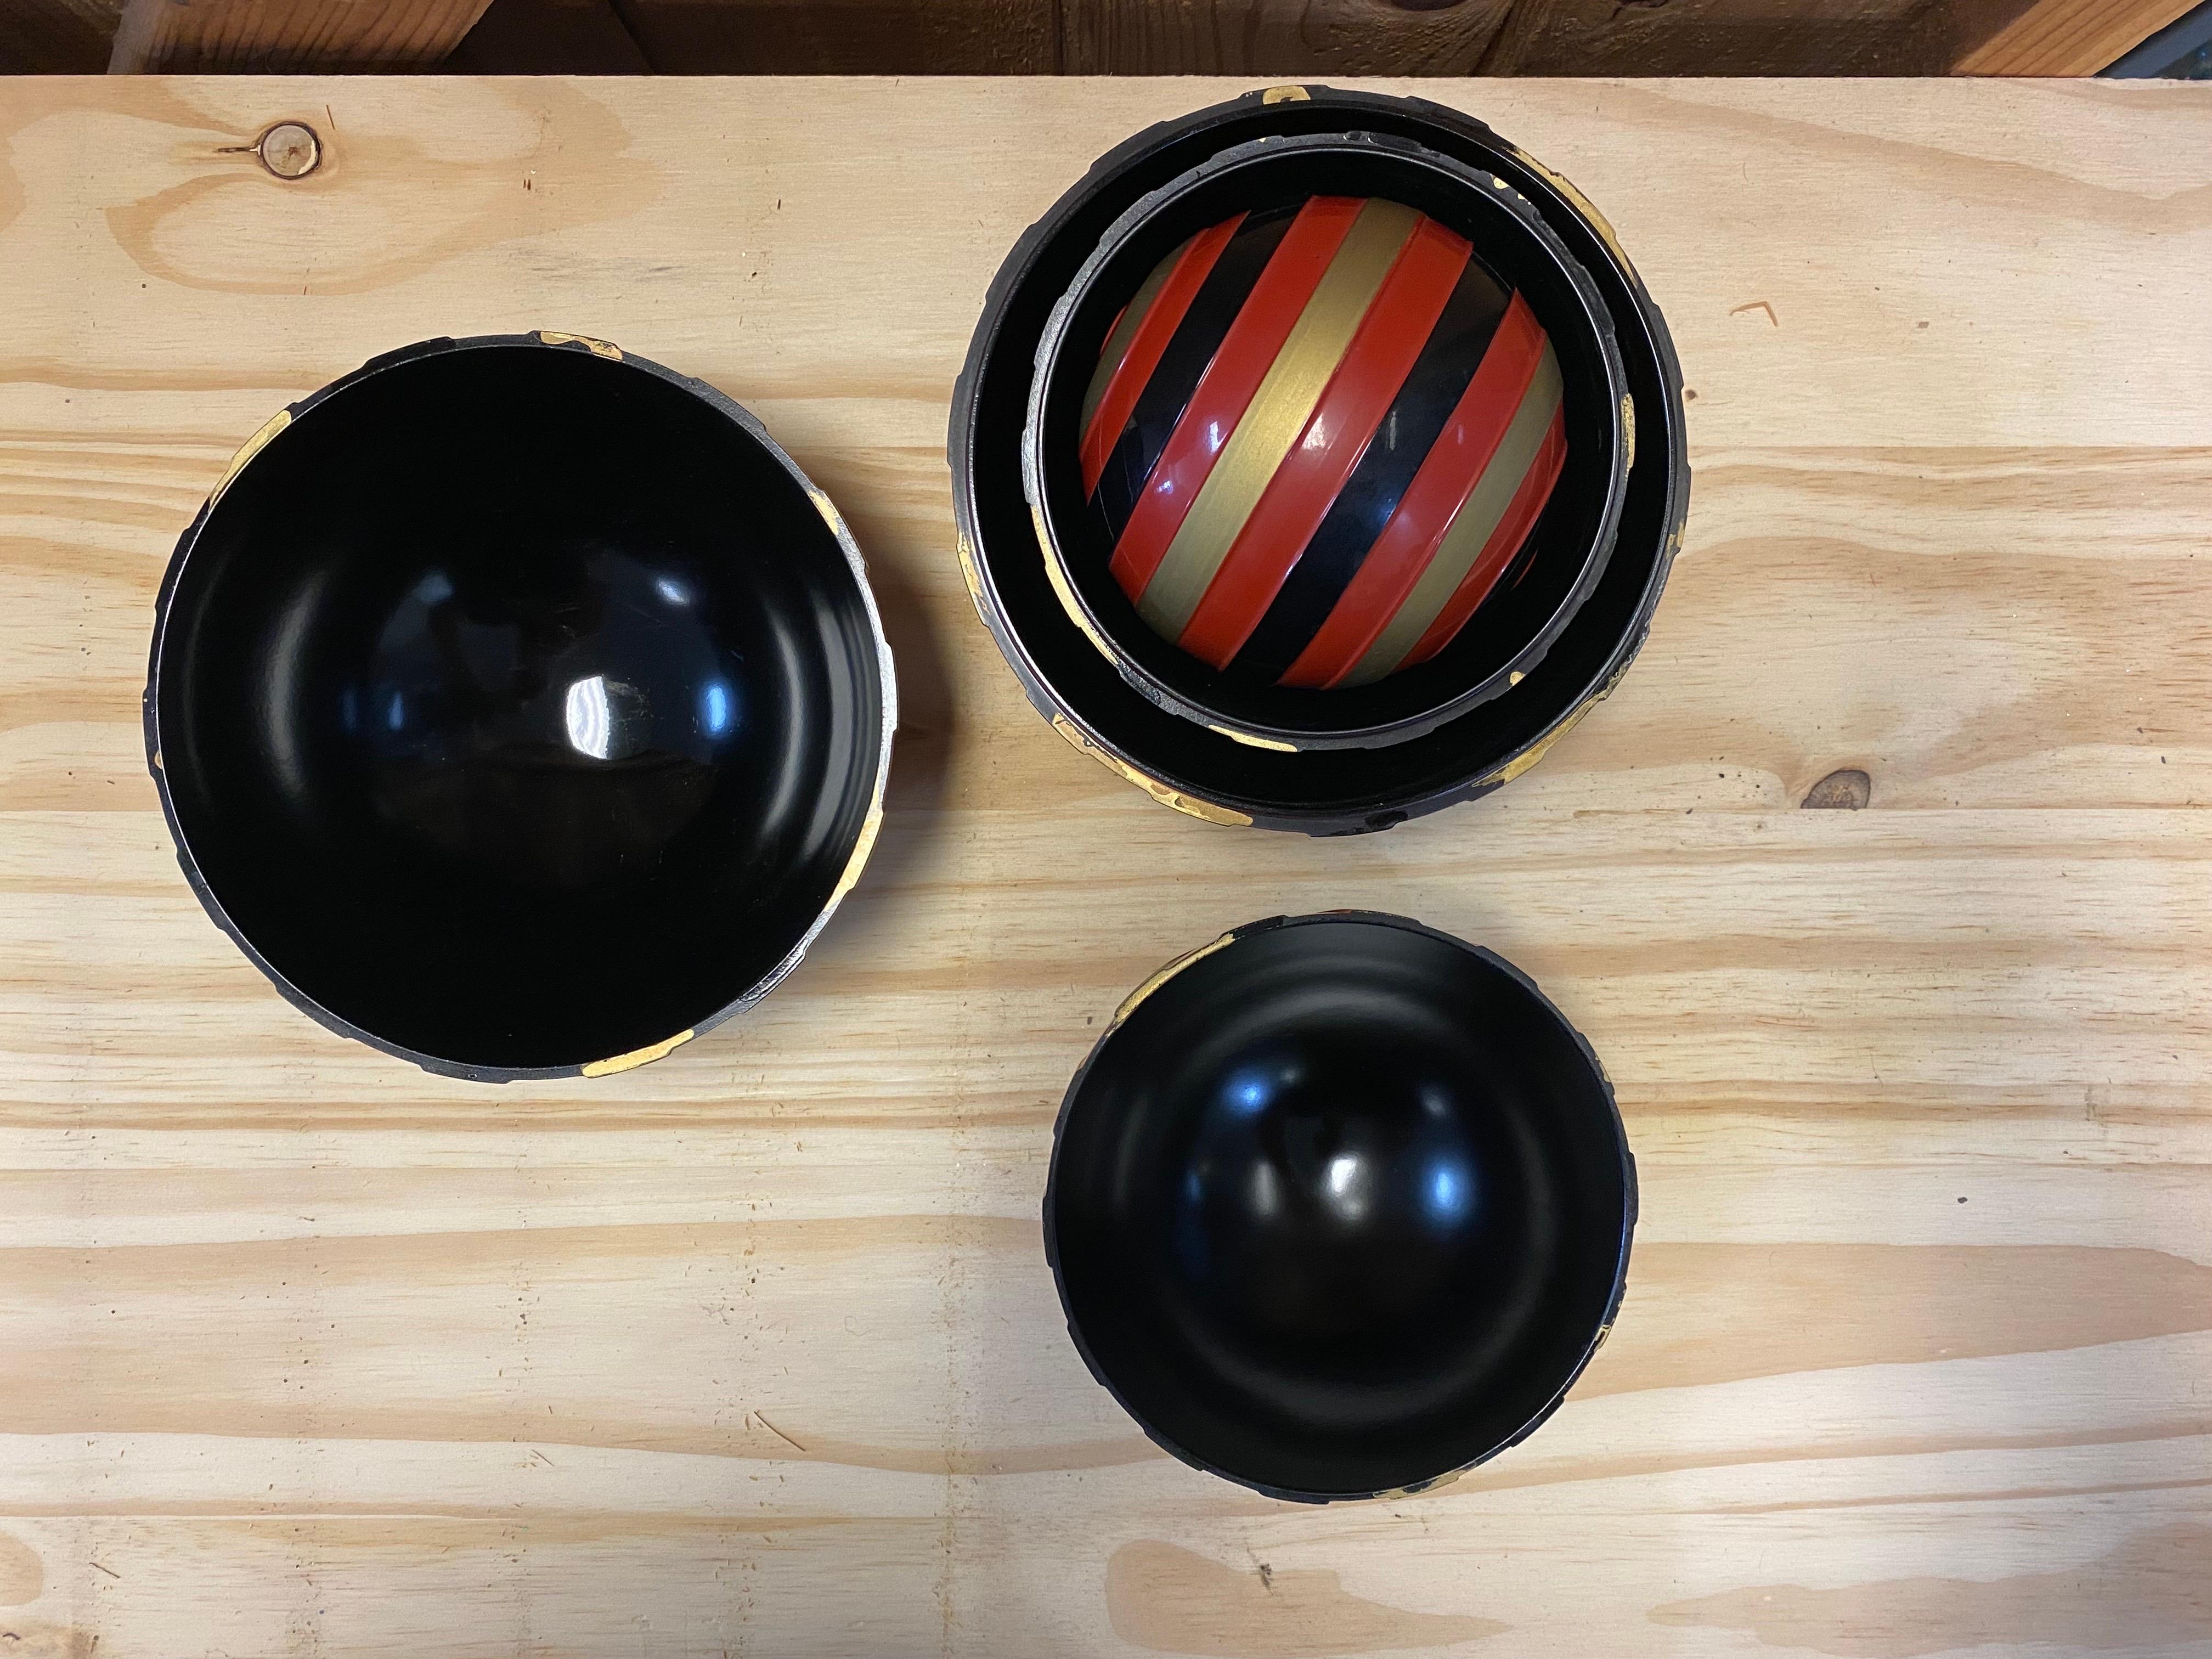 Vintage Japanese Ball Shaped Plastic Tea Caddy Storage Containers, Set of 3 In Good Condition For Sale In San Carlos, CA